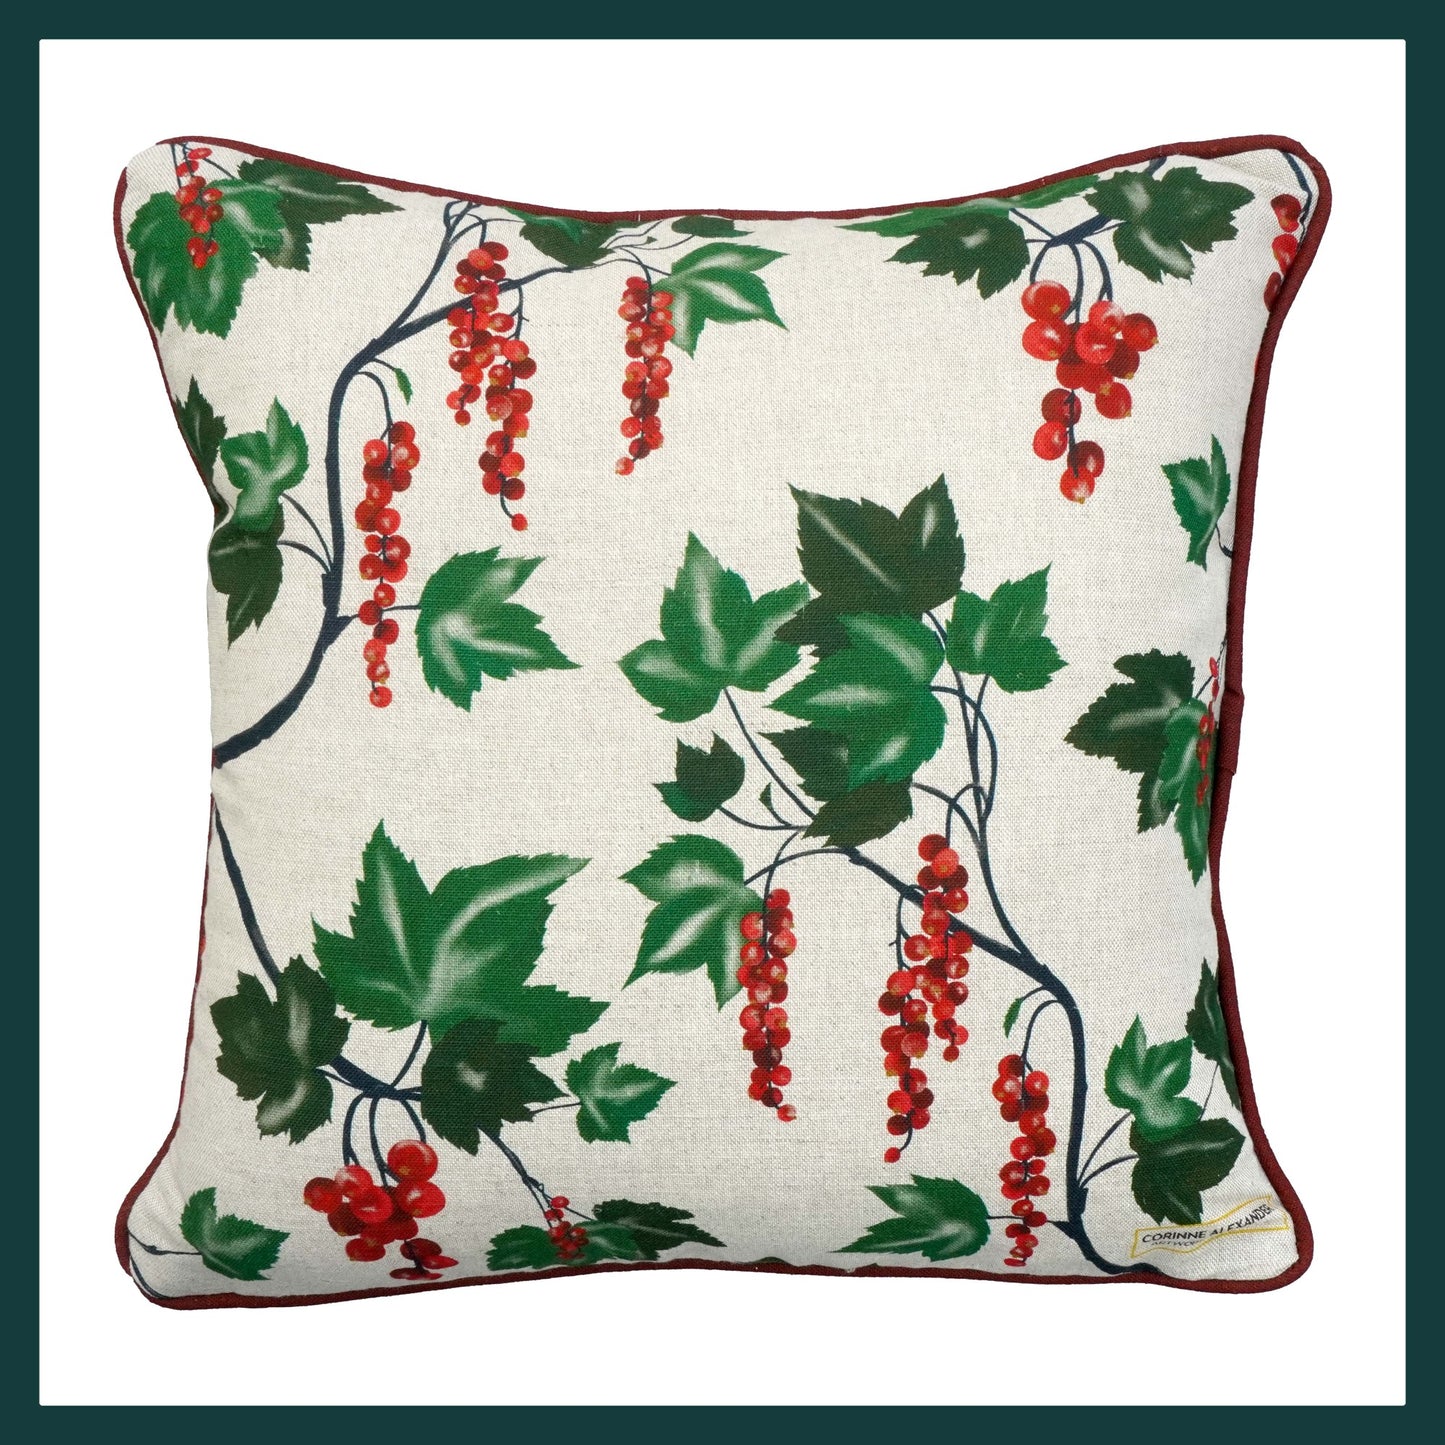 Redcurrant scatter cushion